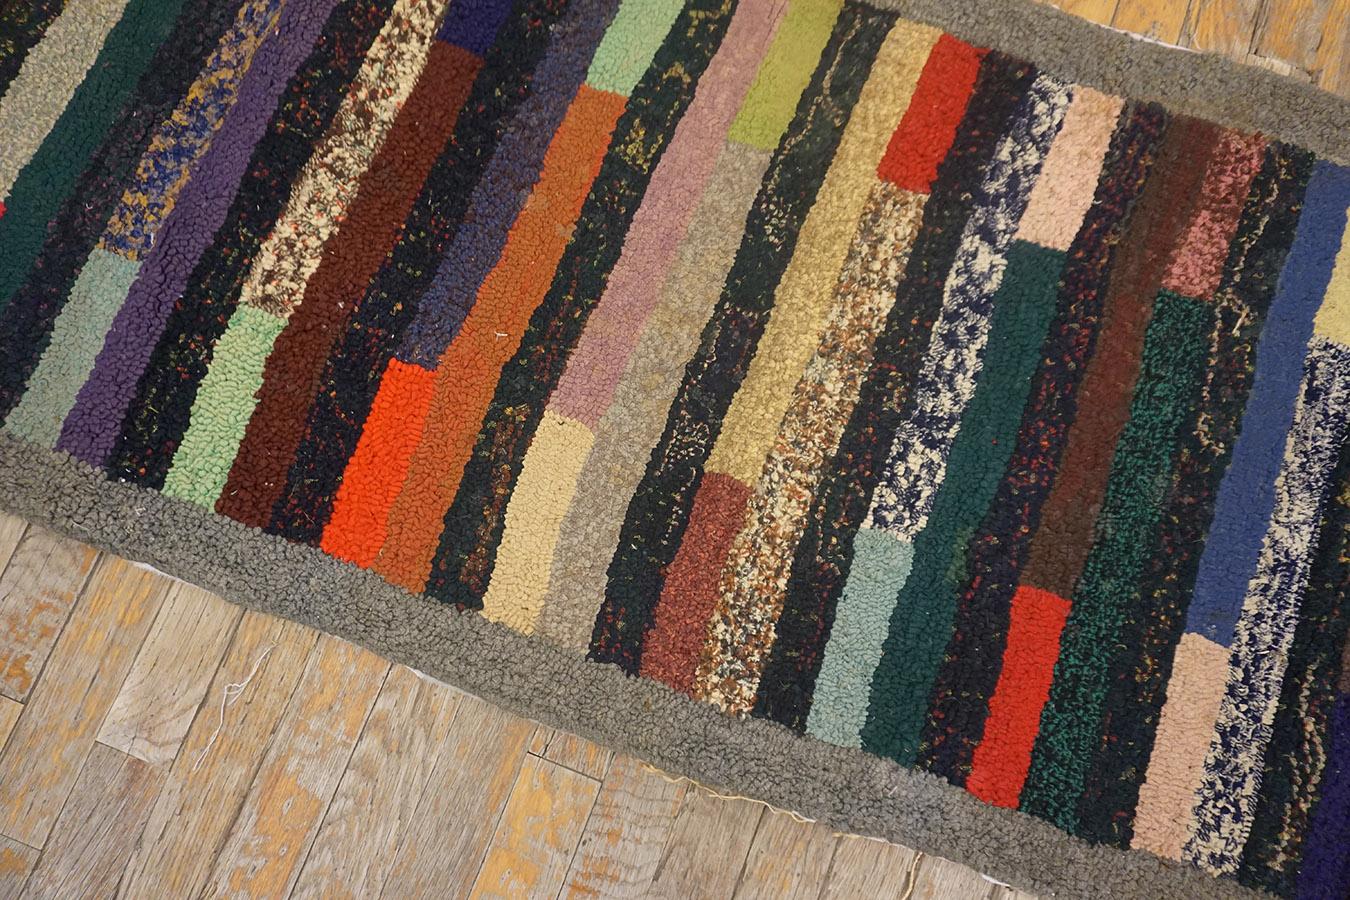 Mid-20th Century Antique American hooked Rug 2' 3